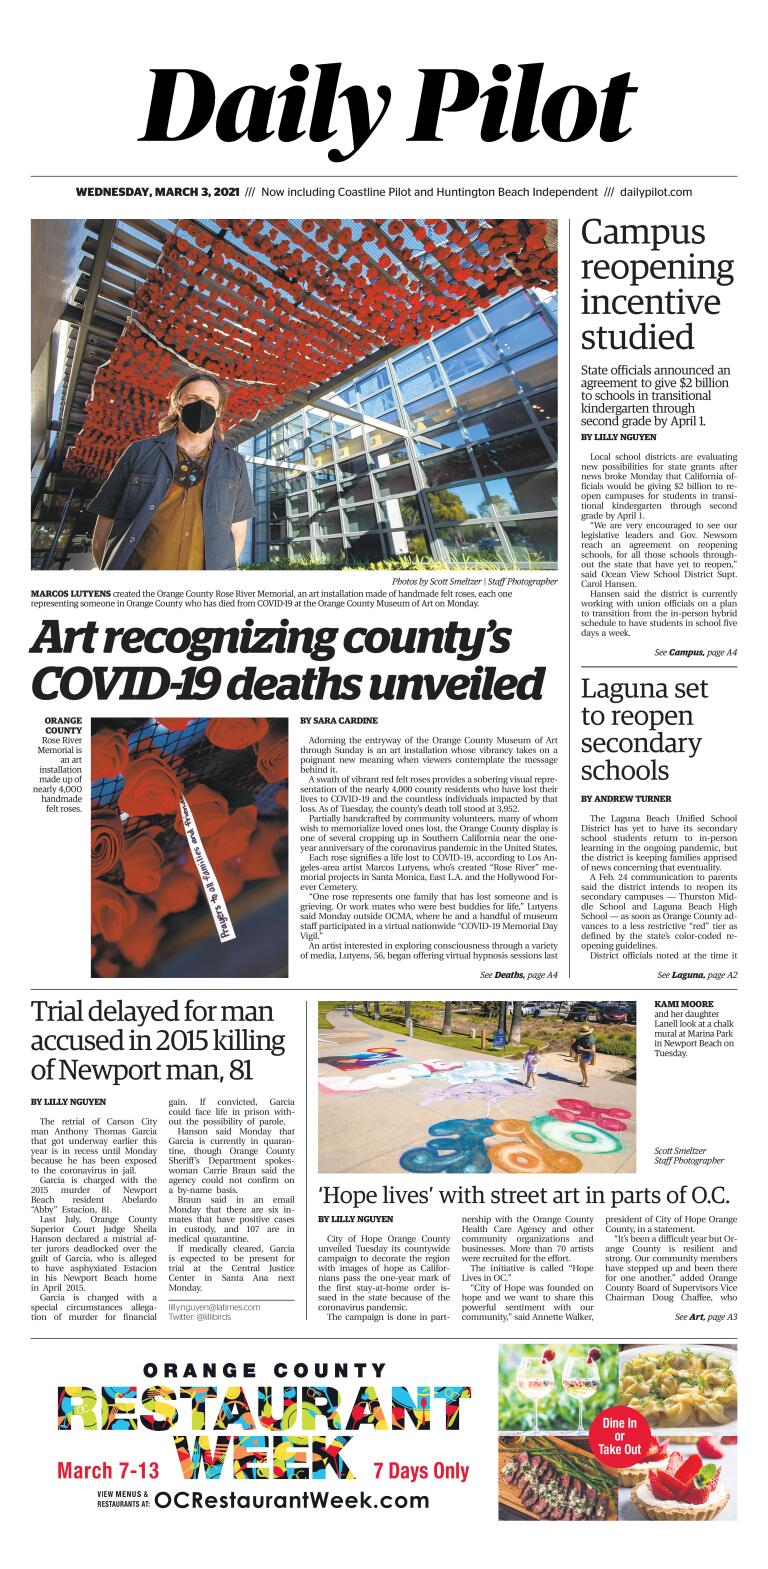 Daily Pilot e-Newspaper: Wednesday, March 3, 2021 - Los Angeles Times